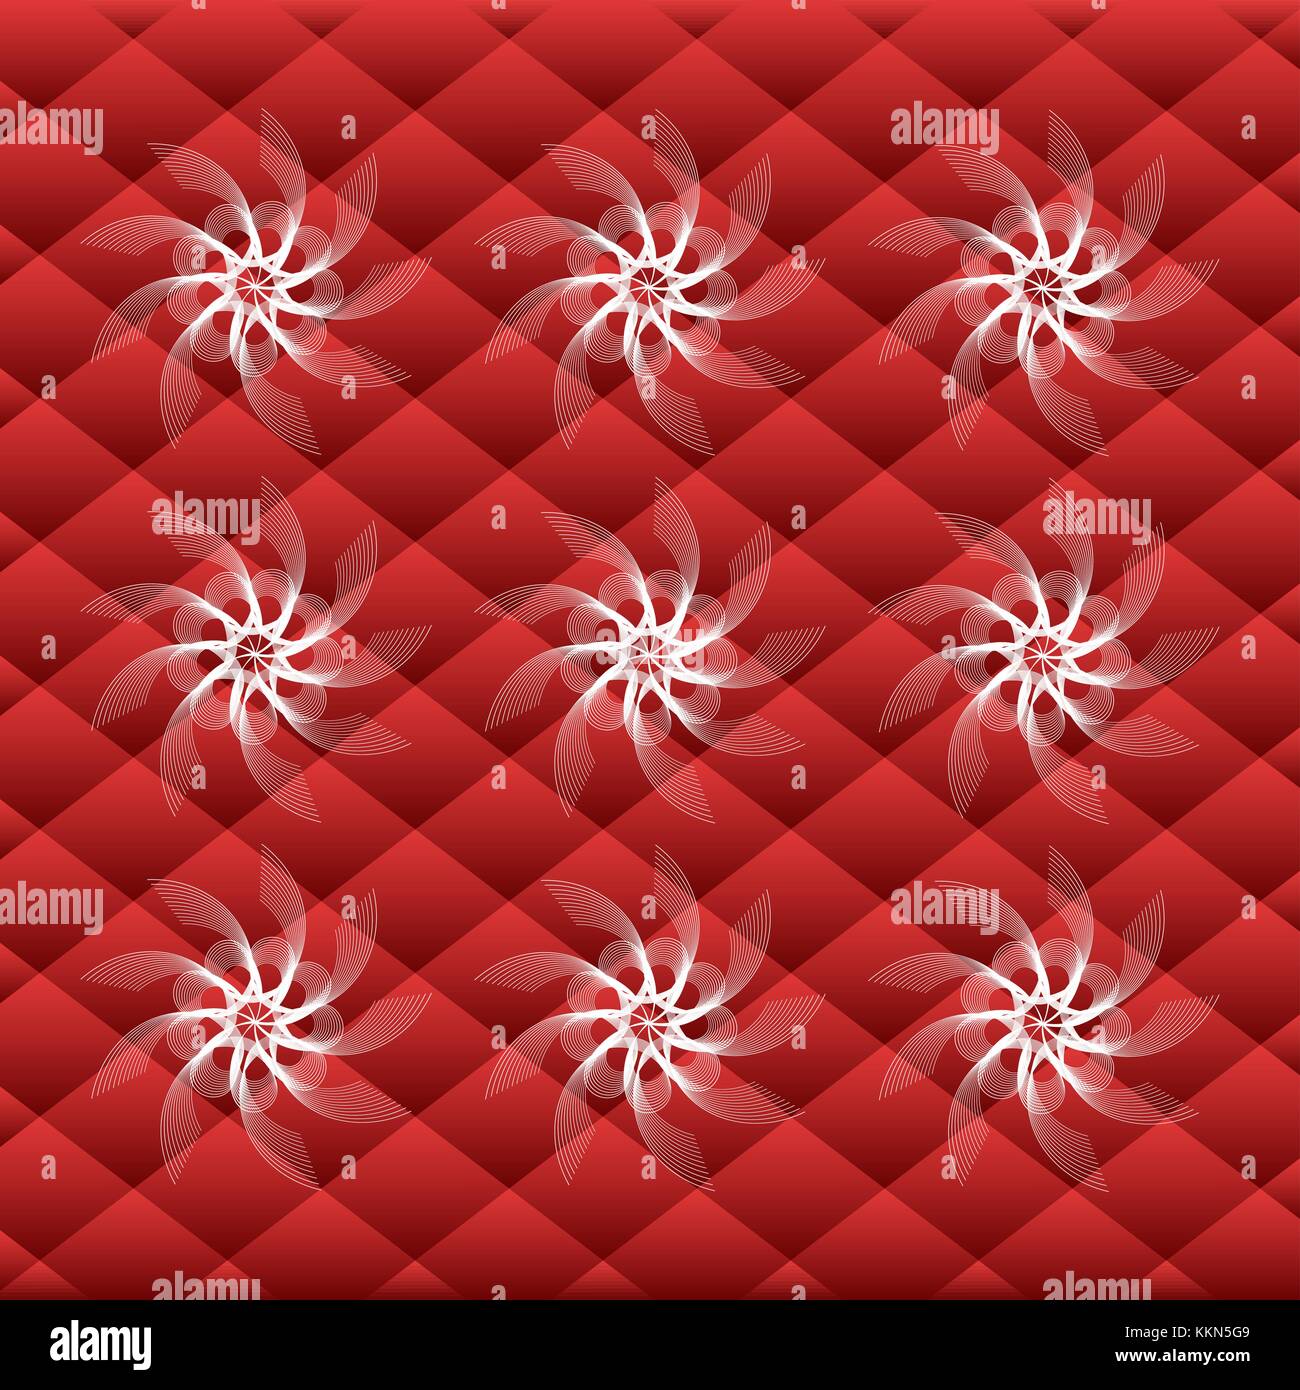 background with scarlet squares and white blizzard Stock Vector